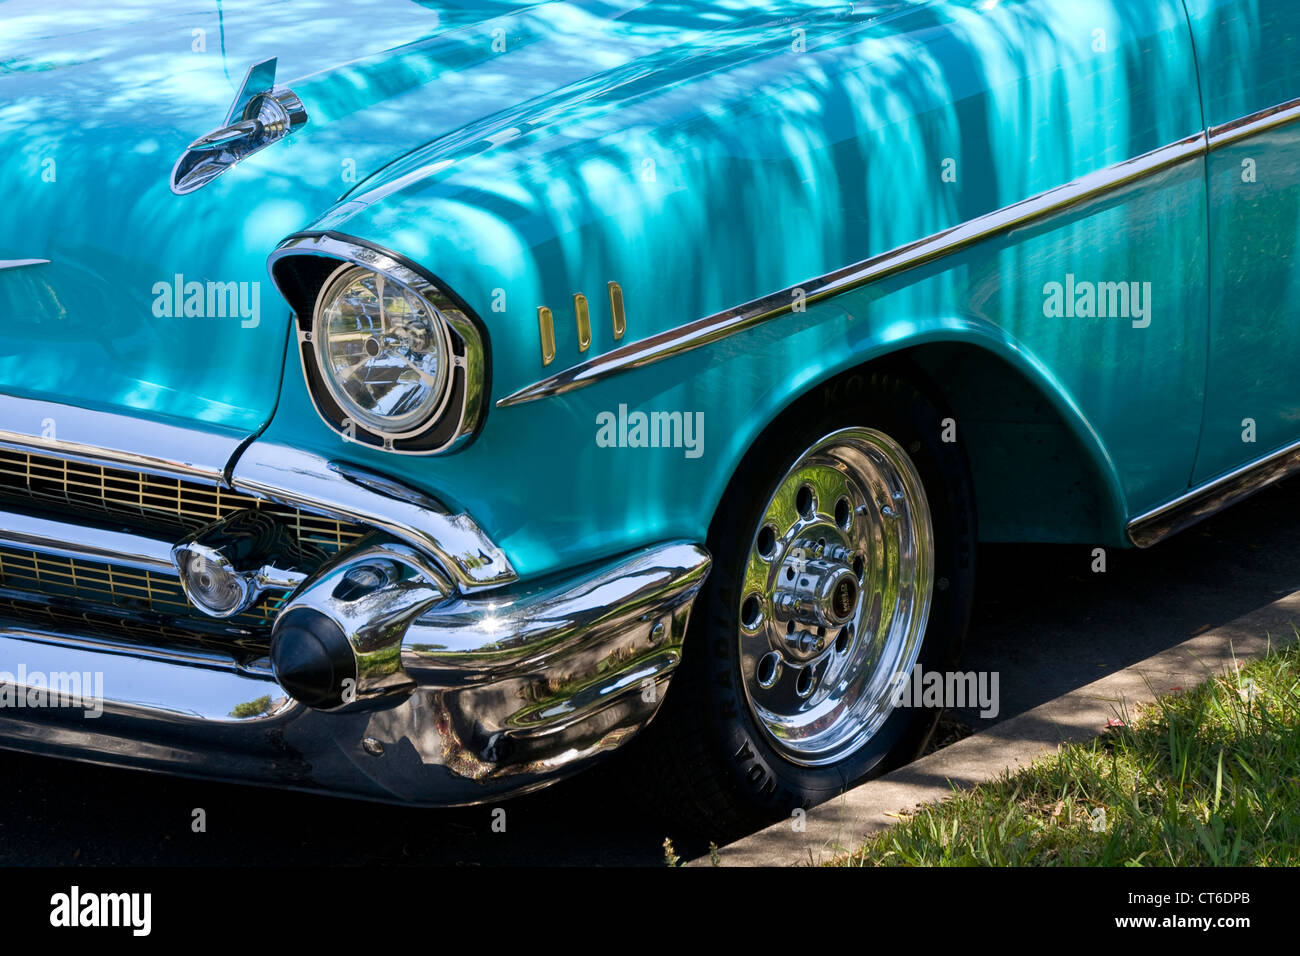 Part of a 1957 Chevrolet Bel Air. This historic vehicle has been immaculately restored. Stock Photo